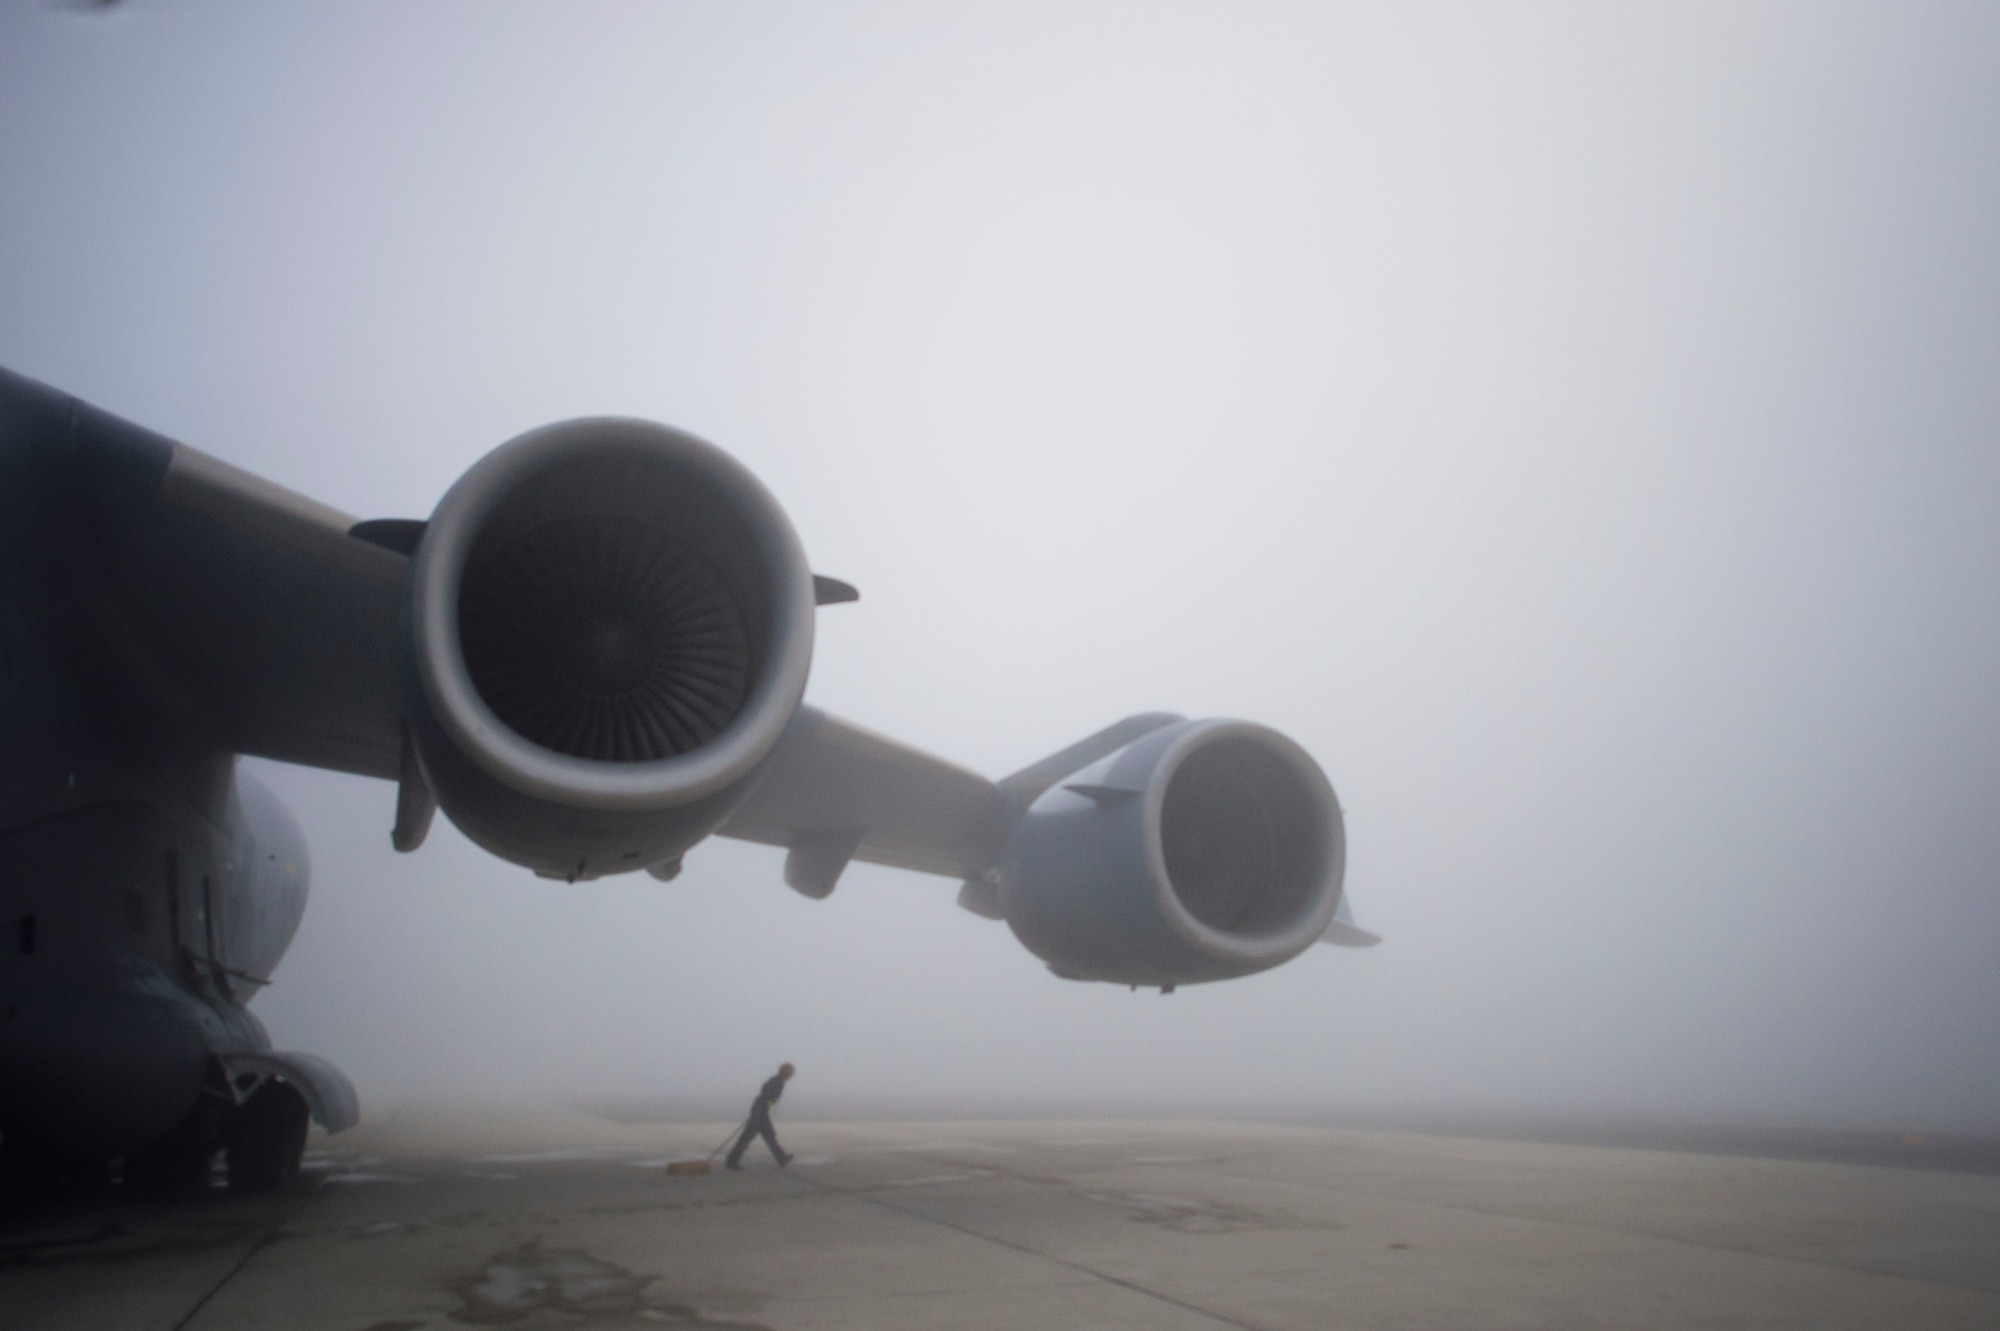 Amidst thick fog, Tech. Sgt. Christine King, 512th Airlift Wing, pulls the wheel chalk away from a C-17 Globemaster III aircraft prior to launching the mission from Dover Air Force Base, Del., March 17, 2016. As a dedicated crew chief, King frequently trains reserve and active-duty Airmen on C-17 maintenance and procedures. (U.S. Air Force photo/ Capt. Bernie Kale)